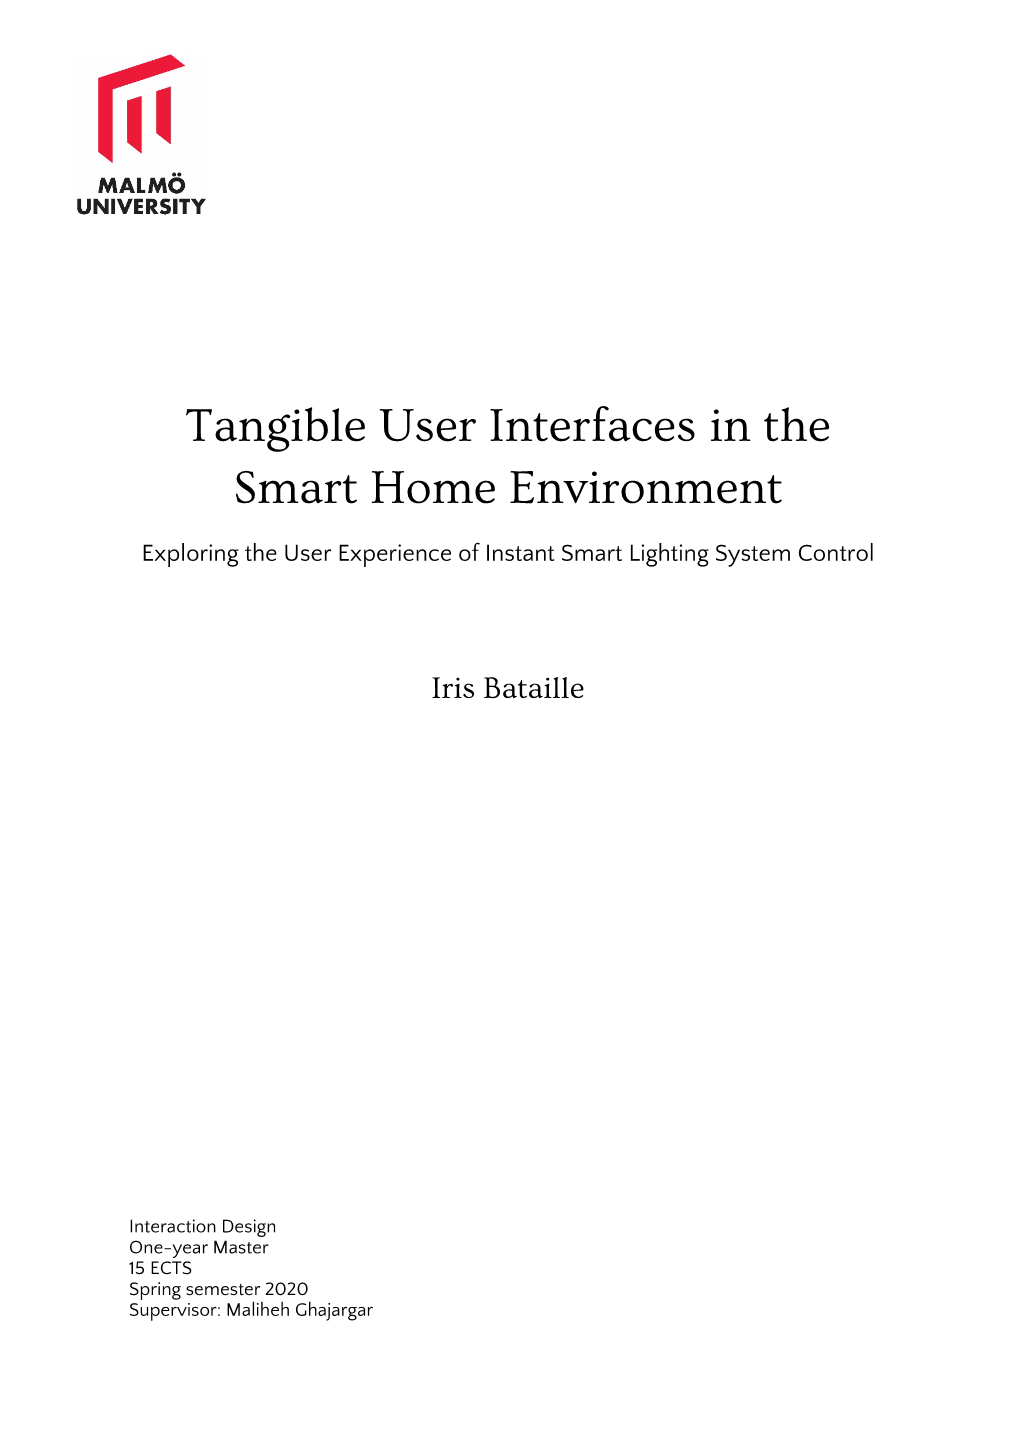 Tangible User Interfaces in the Smart Home Environment